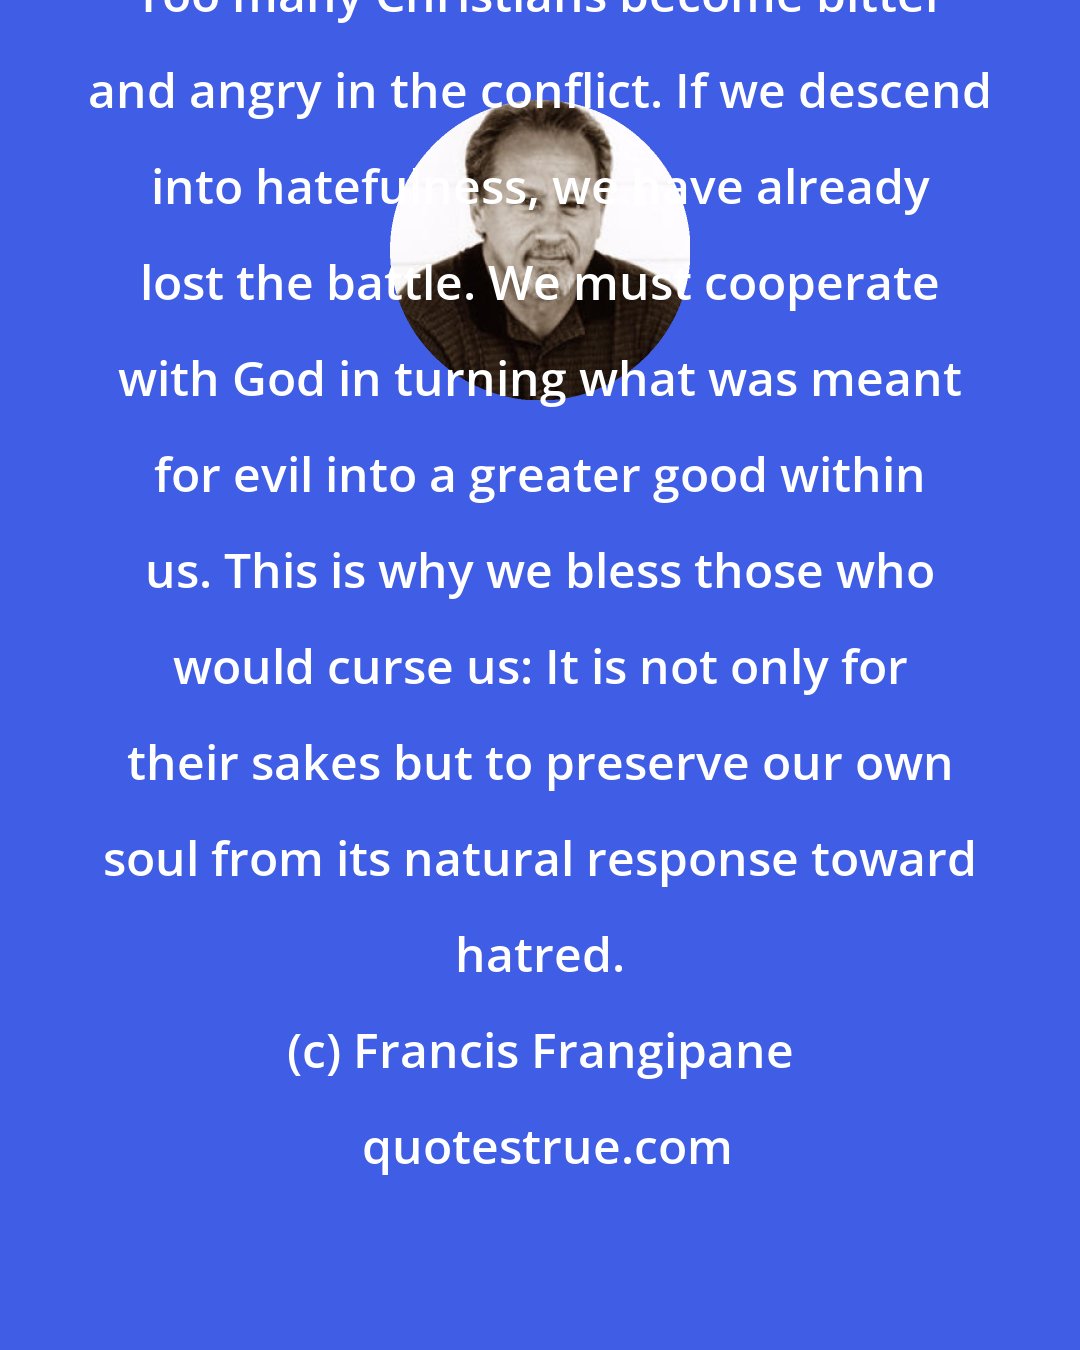 Francis Frangipane: Too many Christians become bitter and angry in the conflict. If we descend into hatefulness, we have already lost the battle. We must cooperate with God in turning what was meant for evil into a greater good within us. This is why we bless those who would curse us: It is not only for their sakes but to preserve our own soul from its natural response toward hatred.